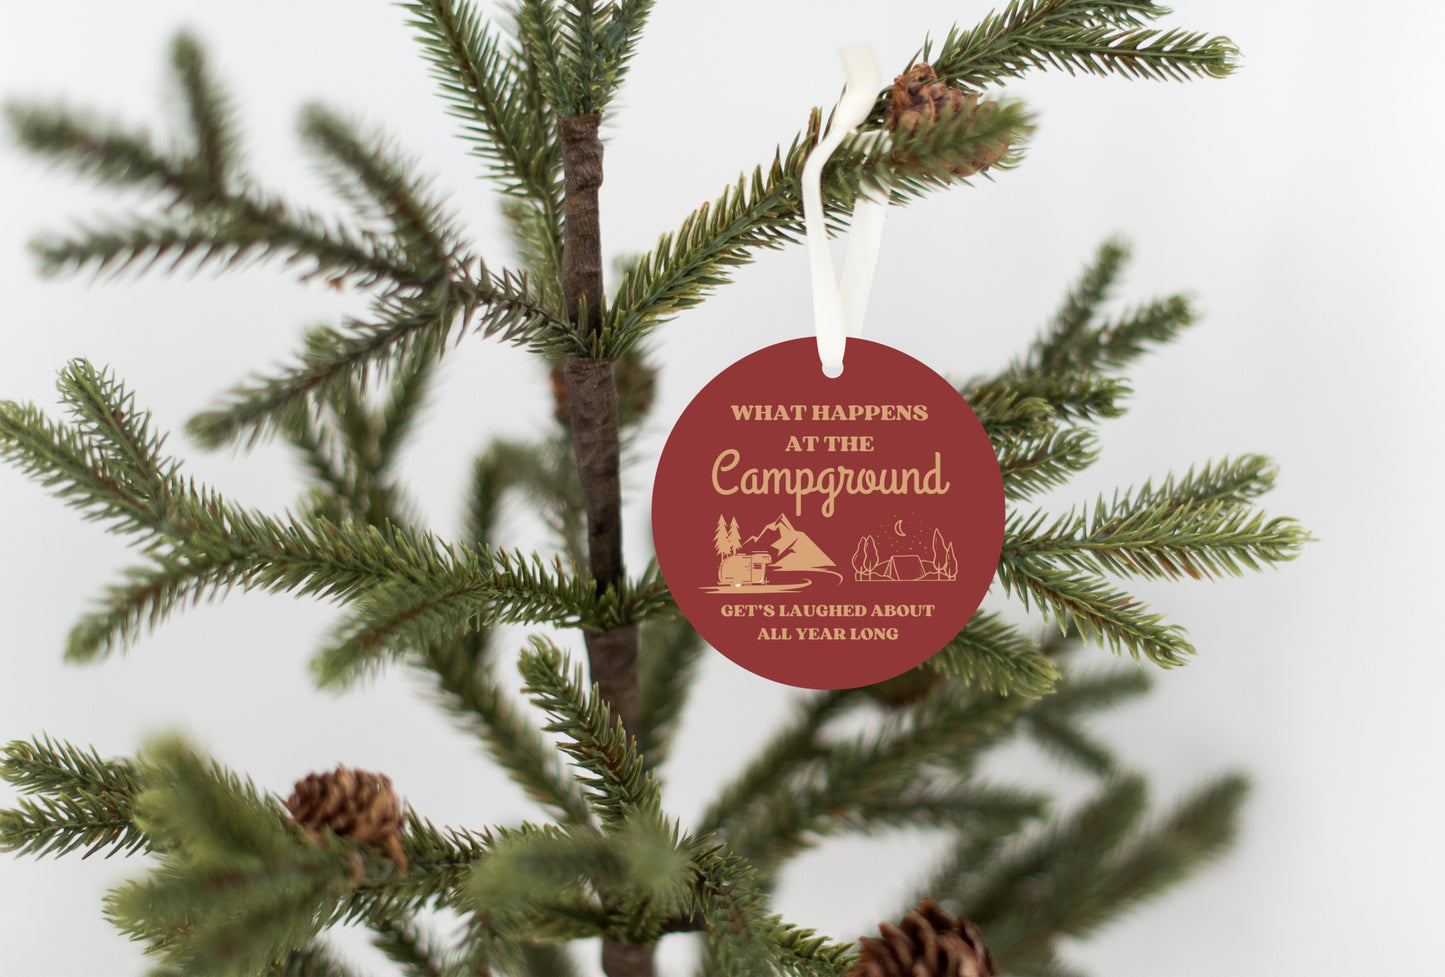 What happens at the Campground, get's laughed about all year long - Christmas ornament